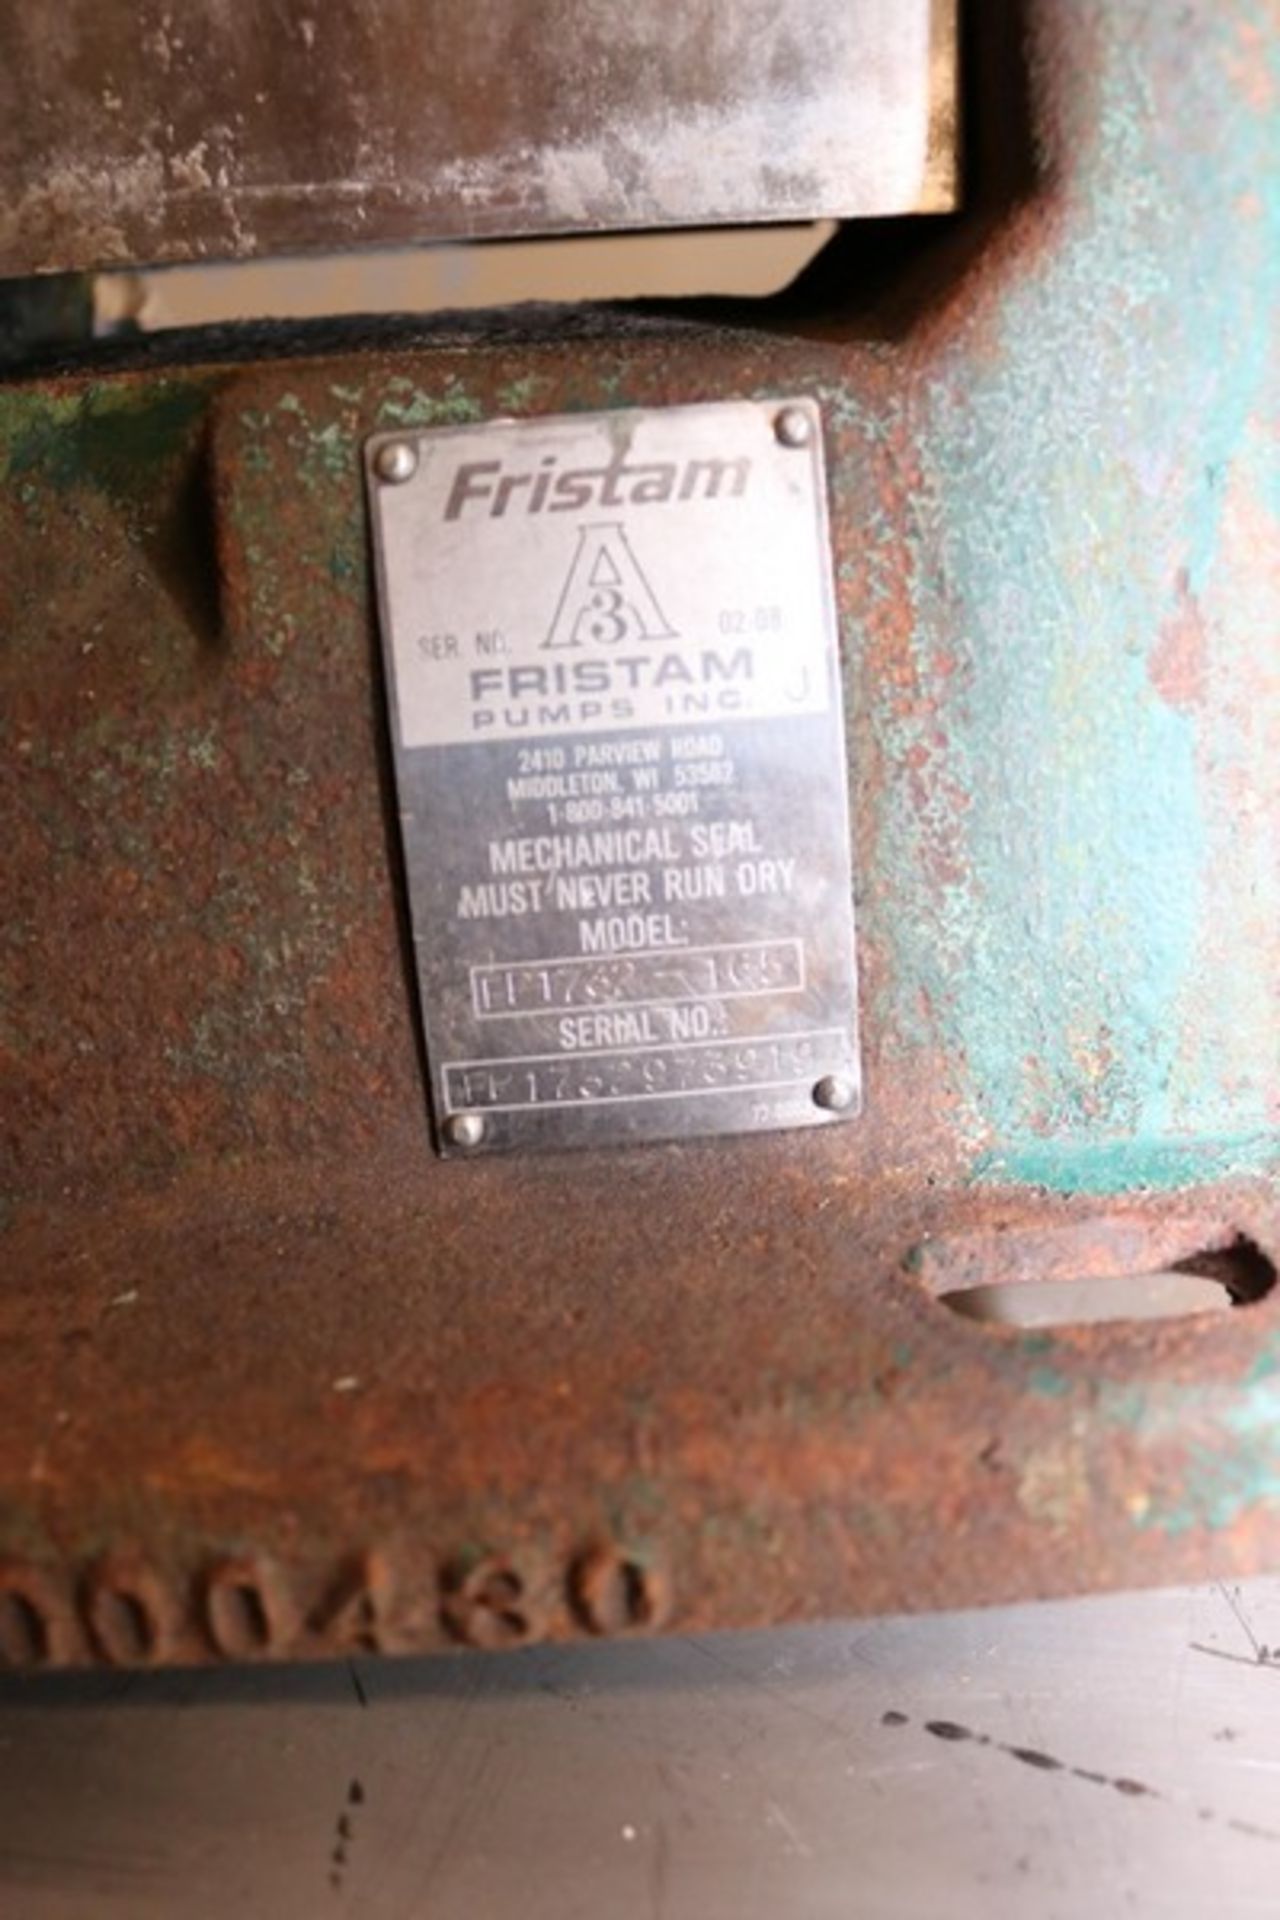 Fristam Aprox. 10 hp Centrifugal Pump, M/N FP1732-165, S/N FP175229739919, with Aprox. 2" x 3" Clamp - Image 6 of 6